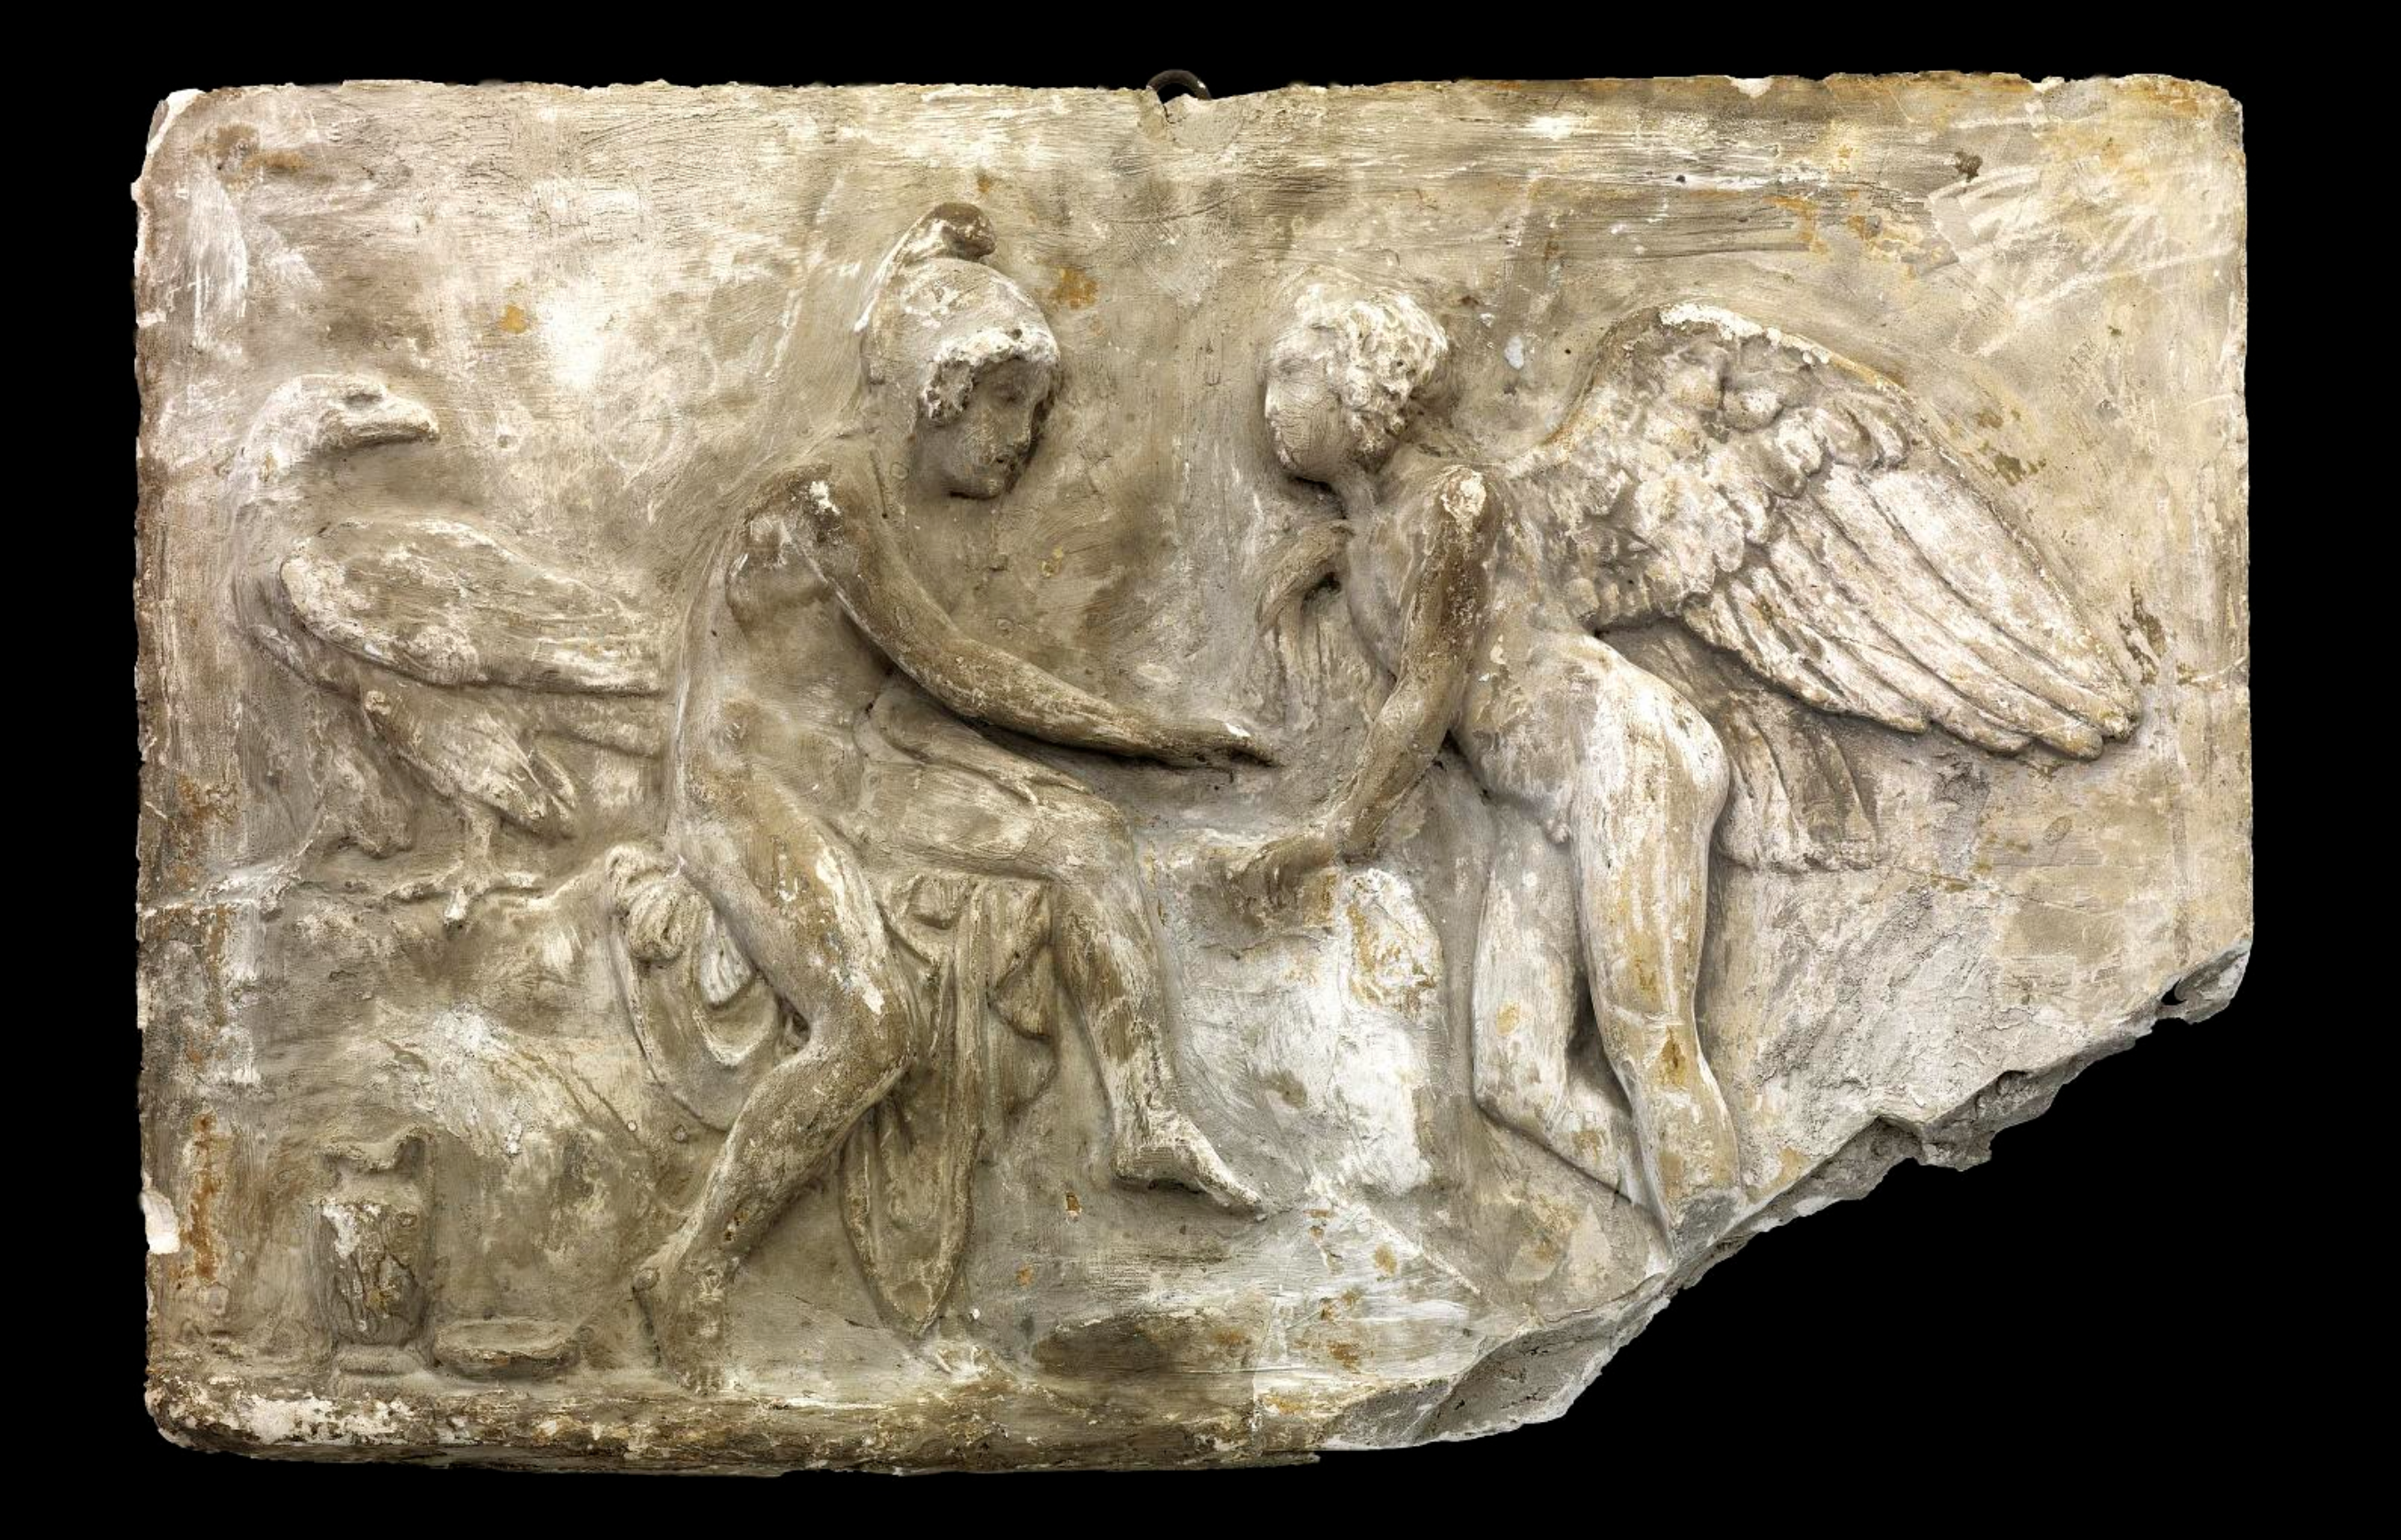 Romans depicted the marital bond between Cupid and Psyche as a strand of pearls whose ends rested in the hands of the god Hymen (the god of marriage ceremonies). Relief plaster depicting Cupid and Psyche by William H. Philip, Smithsonian American Art Museum